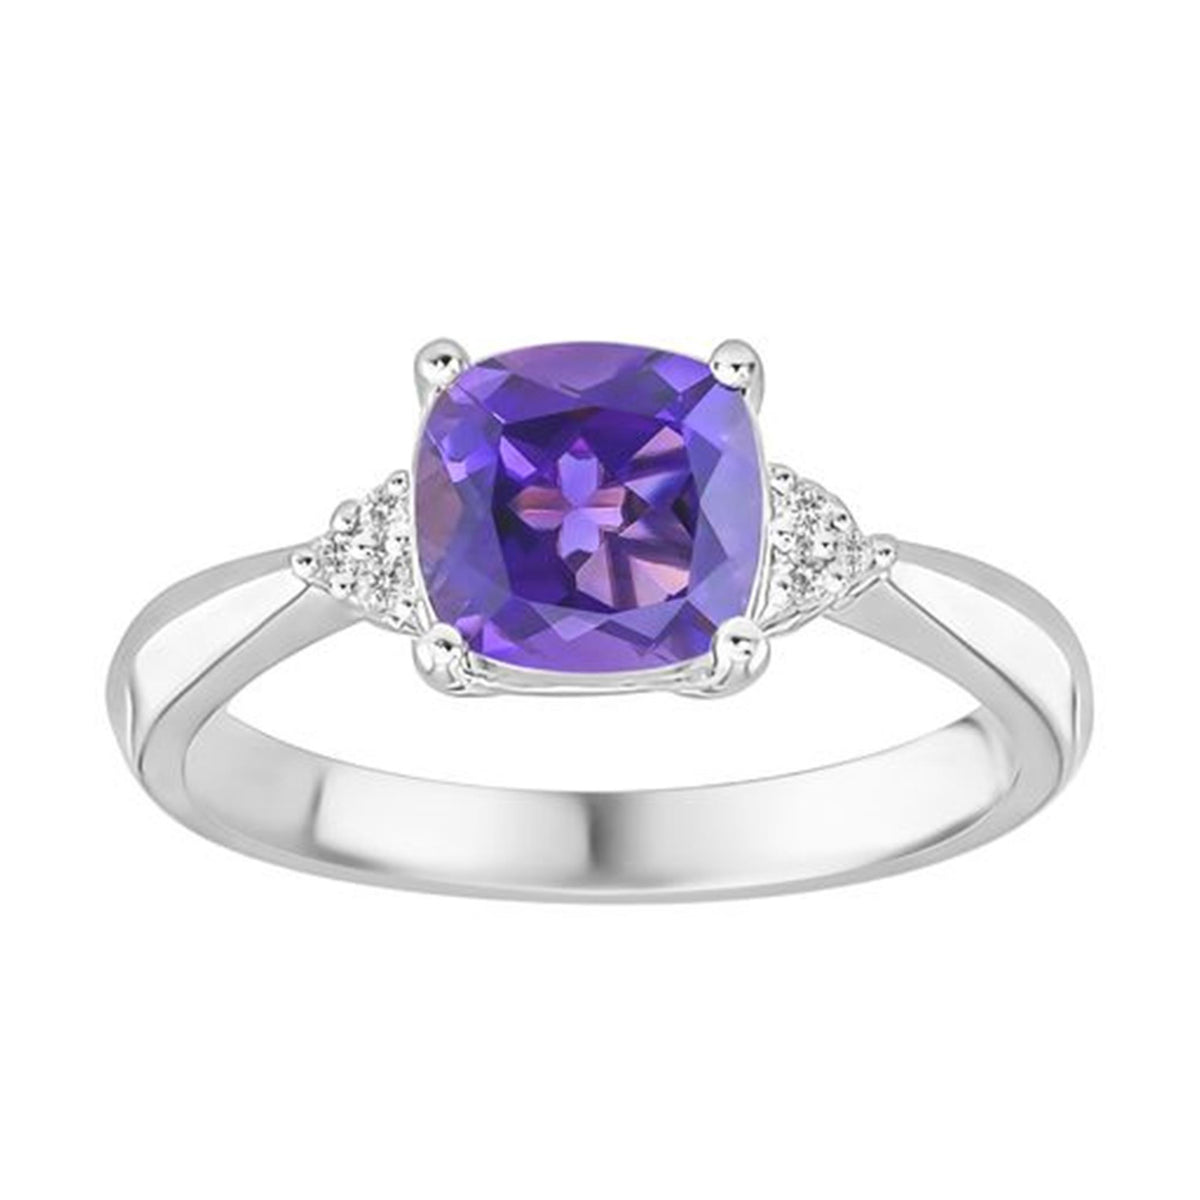 14Kt White Gold Classic Gemstone Ring With 1.36ct Amethyst